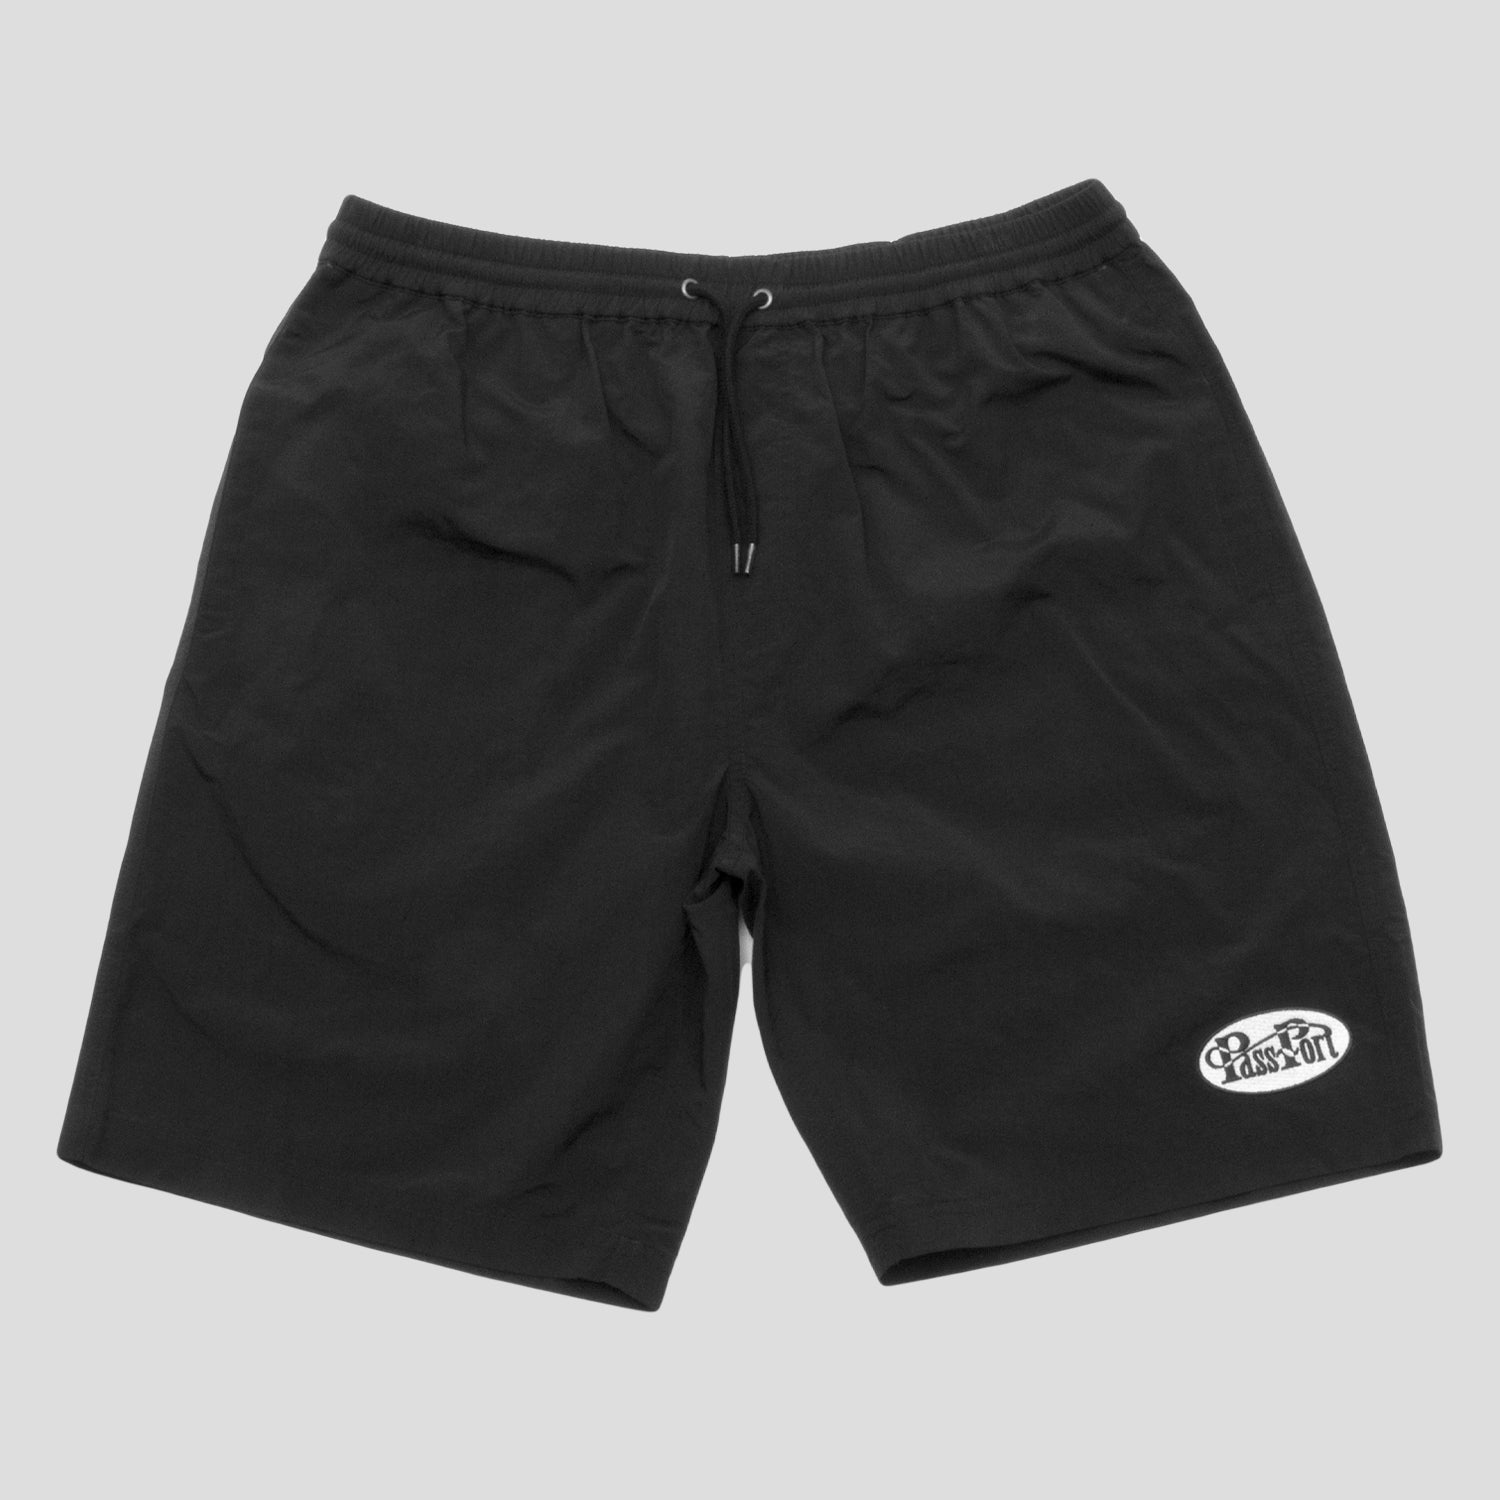 Whip Rpet Casual Short (Black)